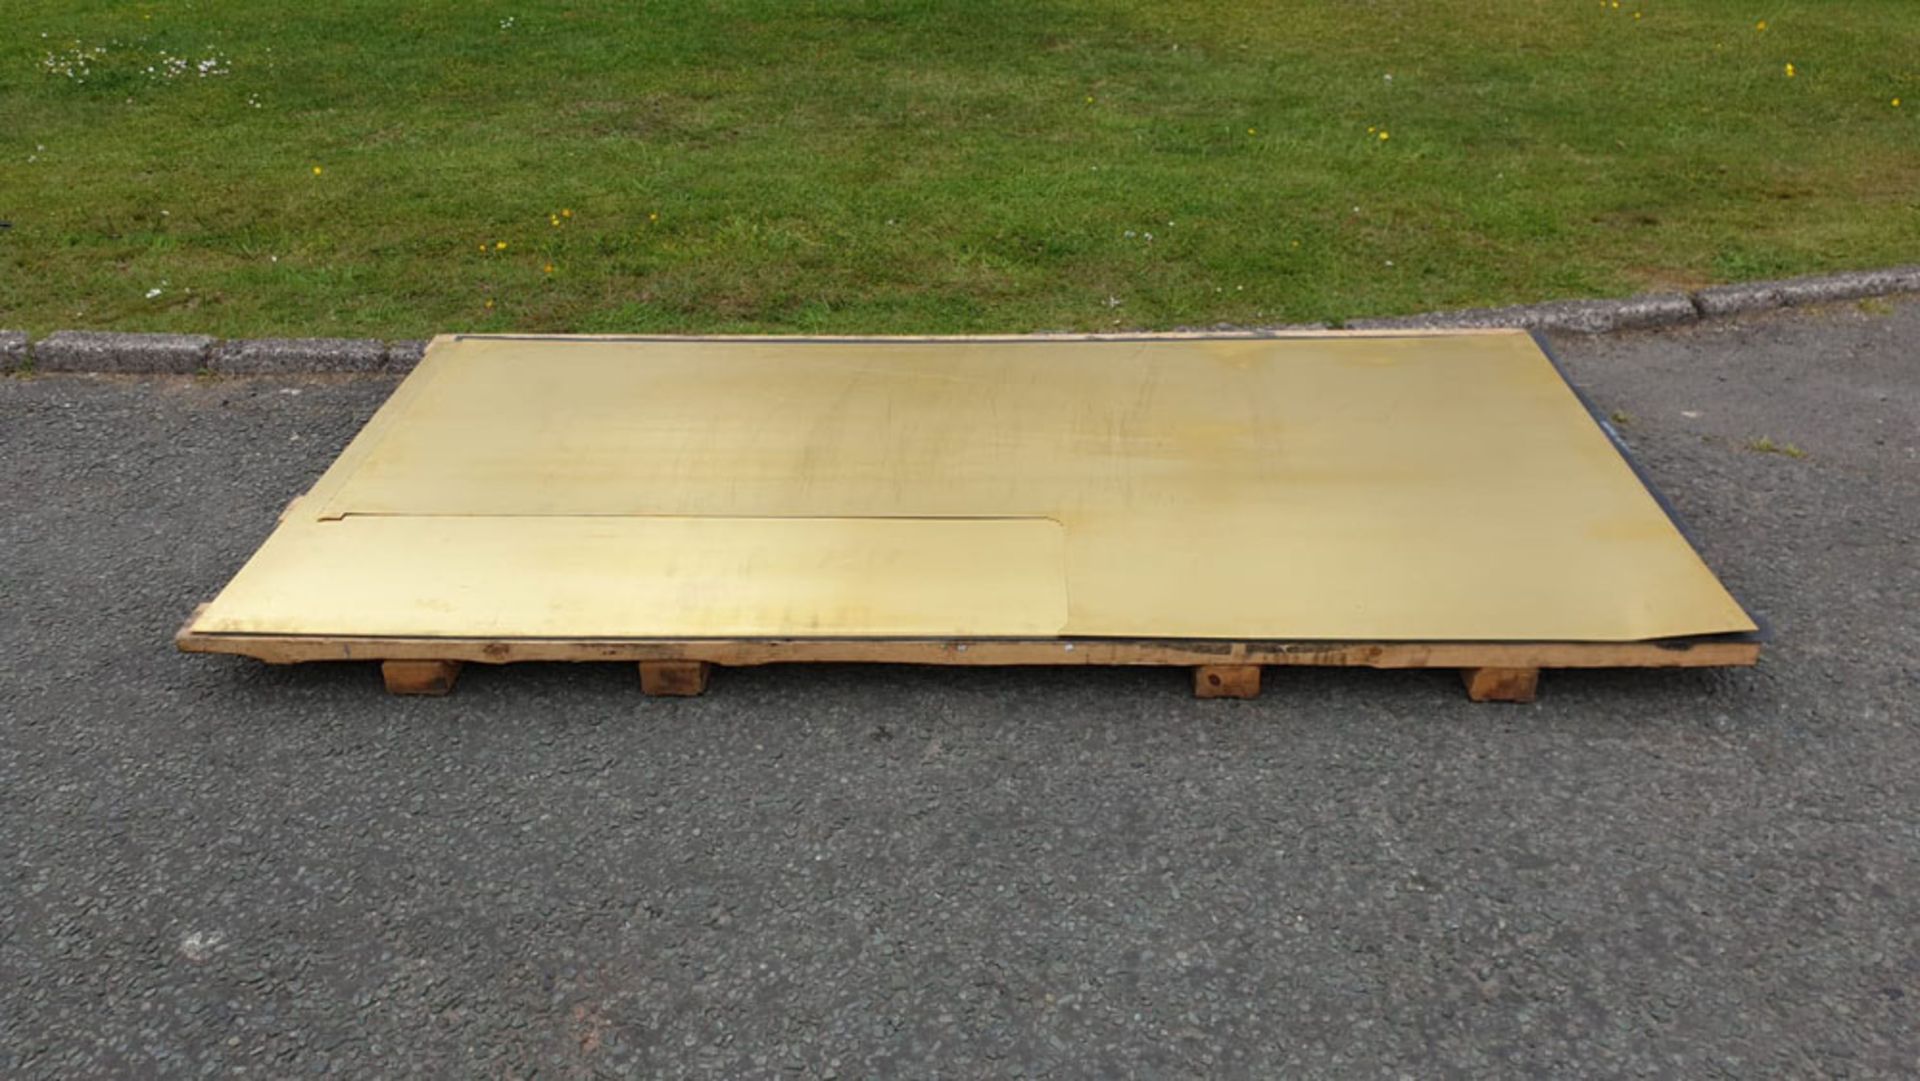 2 x Brass Sheets. 2440mm x 1220mm x 1.2mm. One with Cut our as per Lot Description.